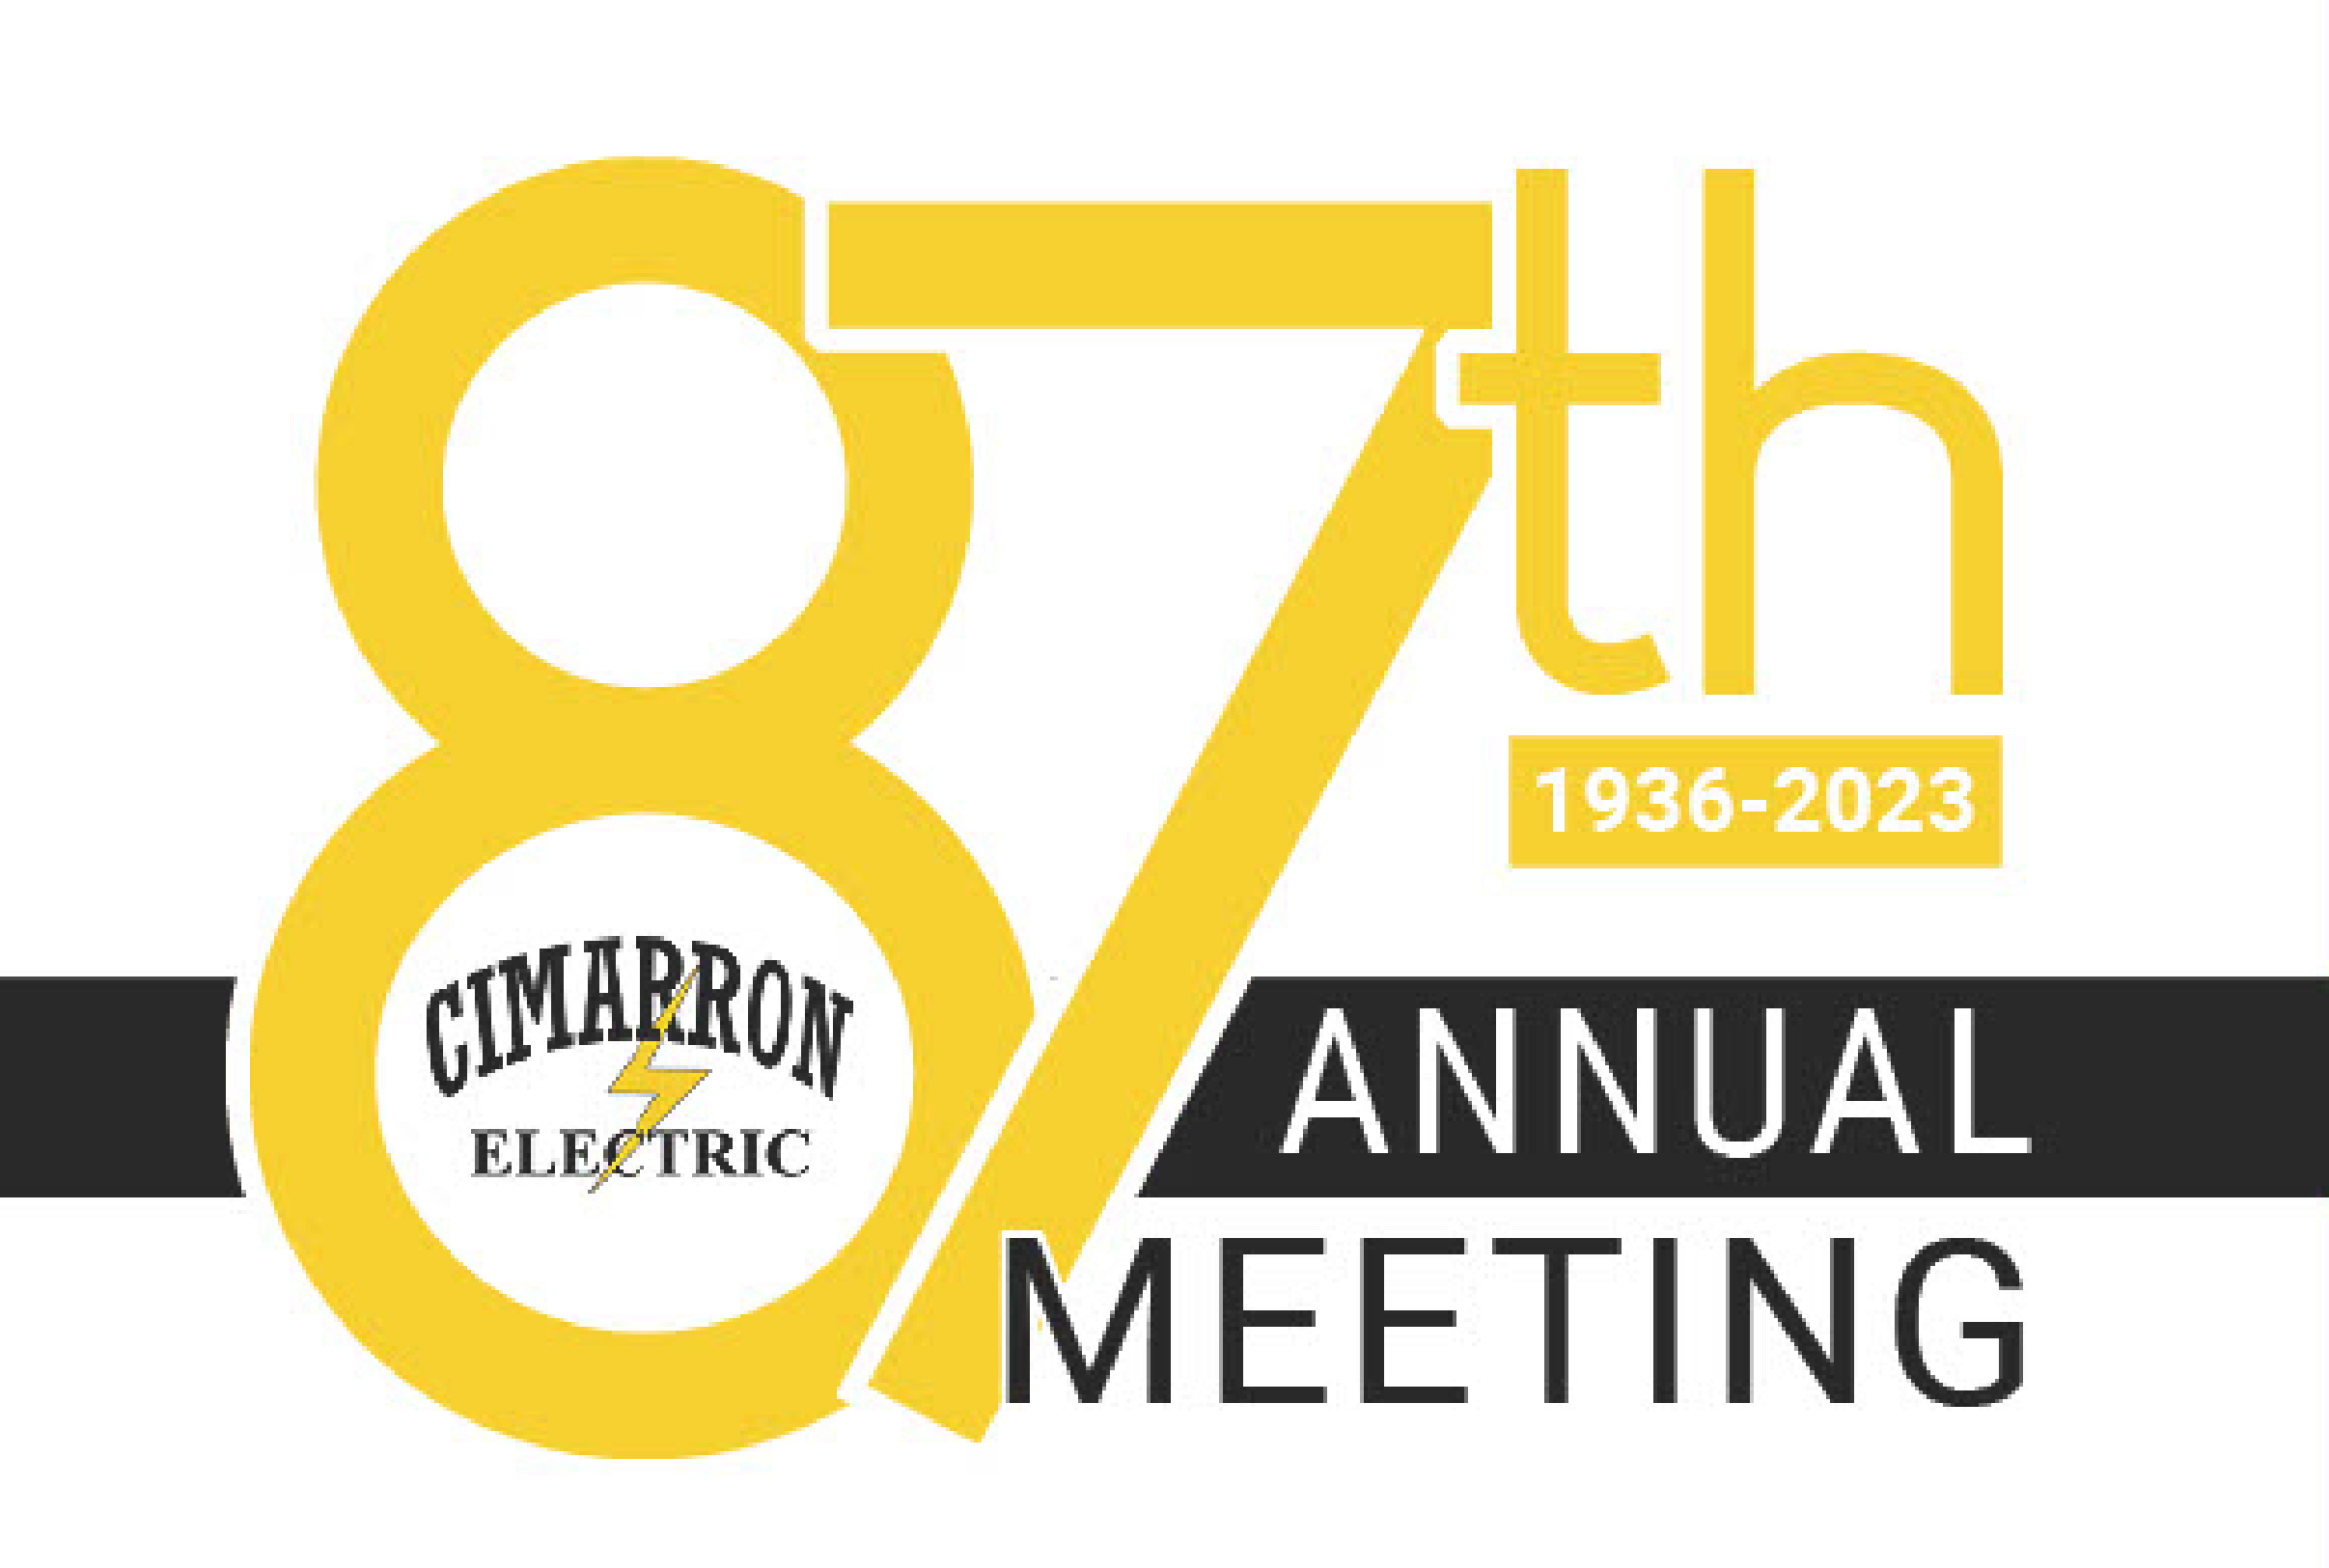 Black, yellow, and white "87th Annual Meeting" graphic.